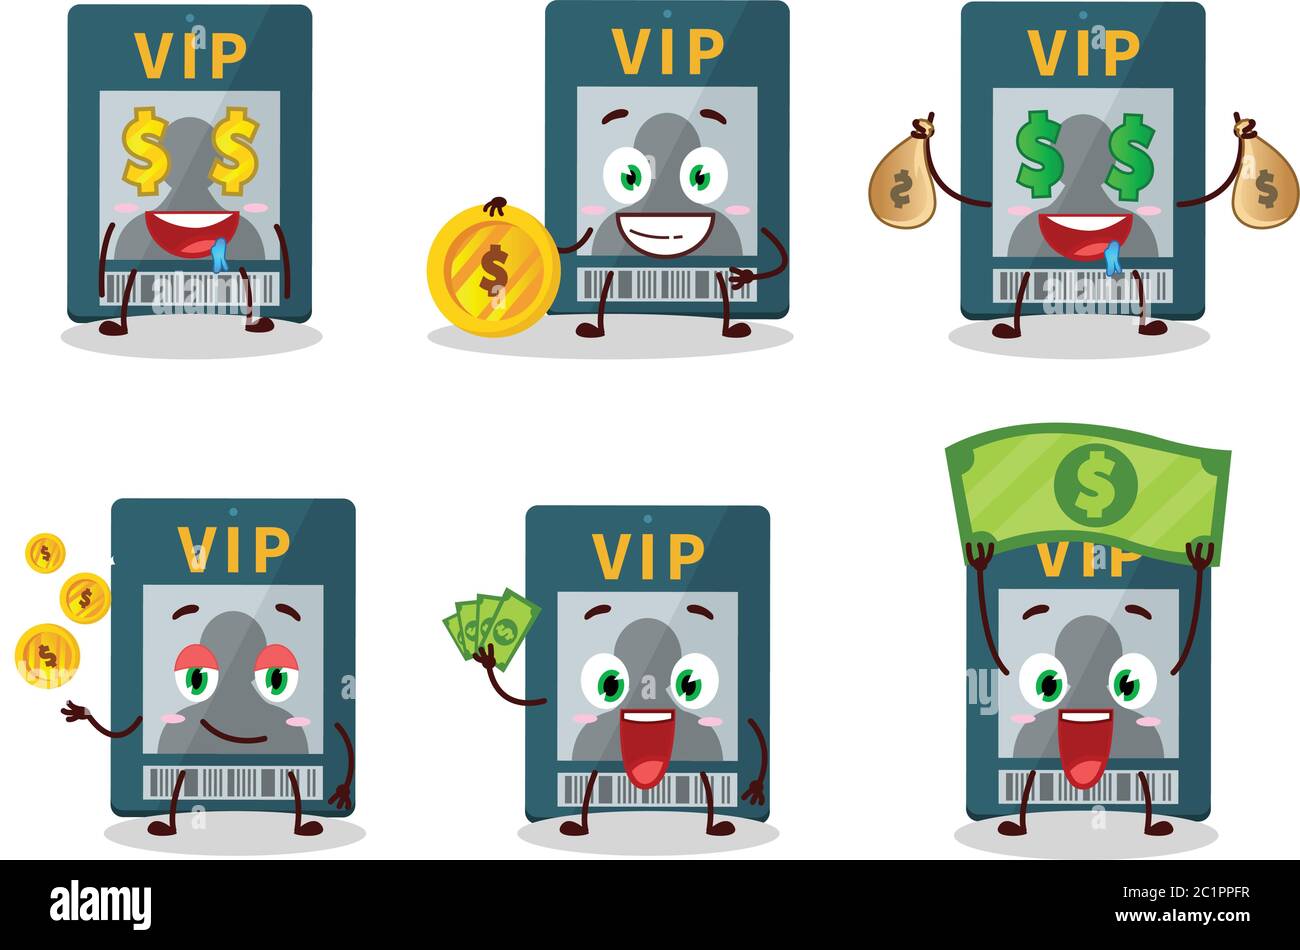 Vip card cartoon character with cute emoticon bring money Stock Vector